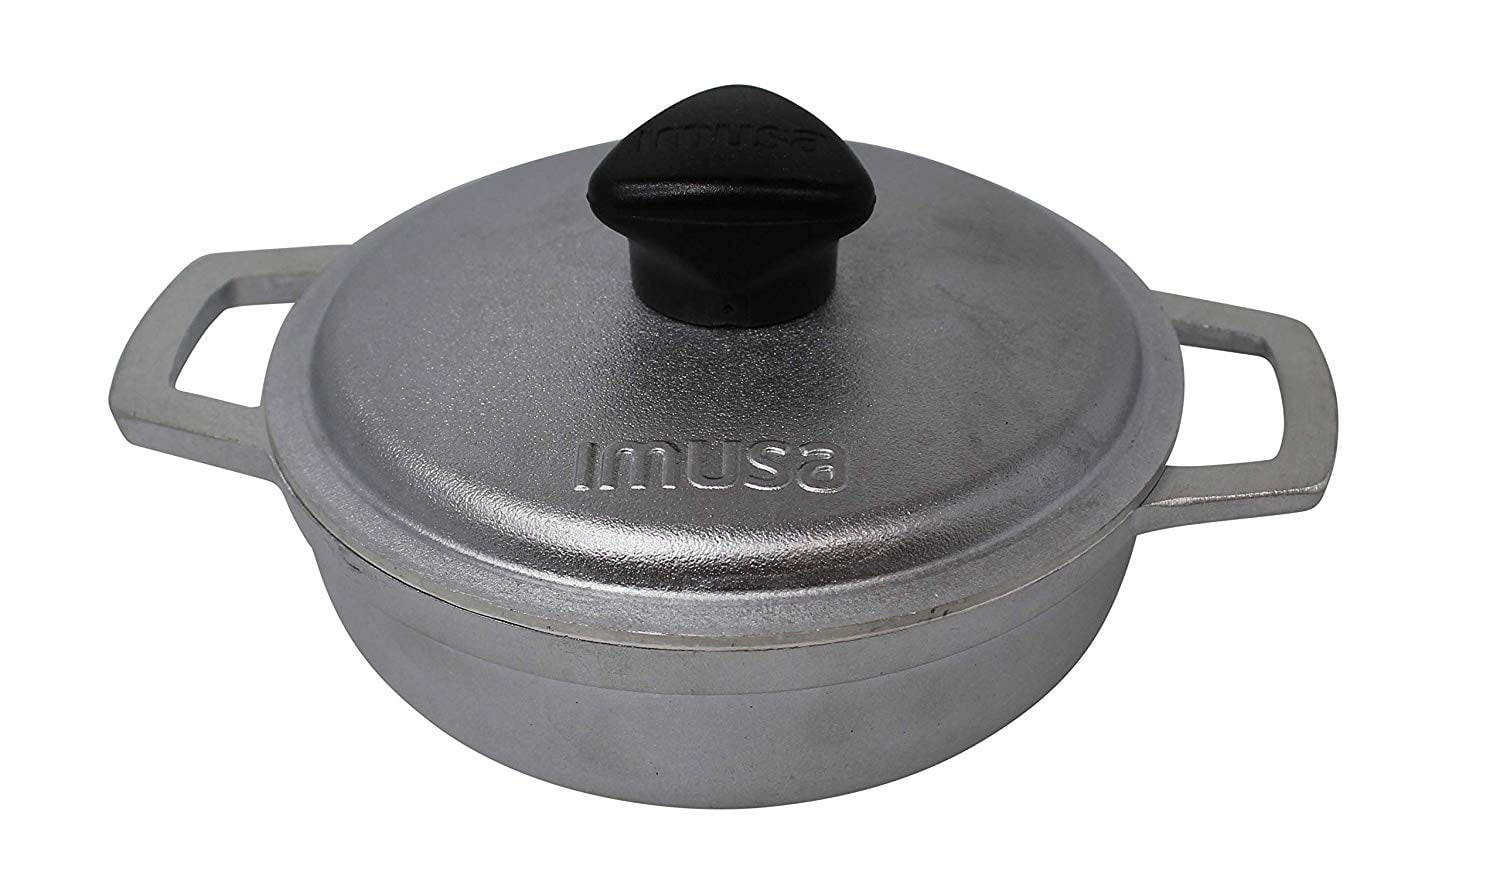 IMUSA - Caldero Pot 26cm 1 Pack (1 count)  Winn-Dixie delivery - available  in as little as two hours